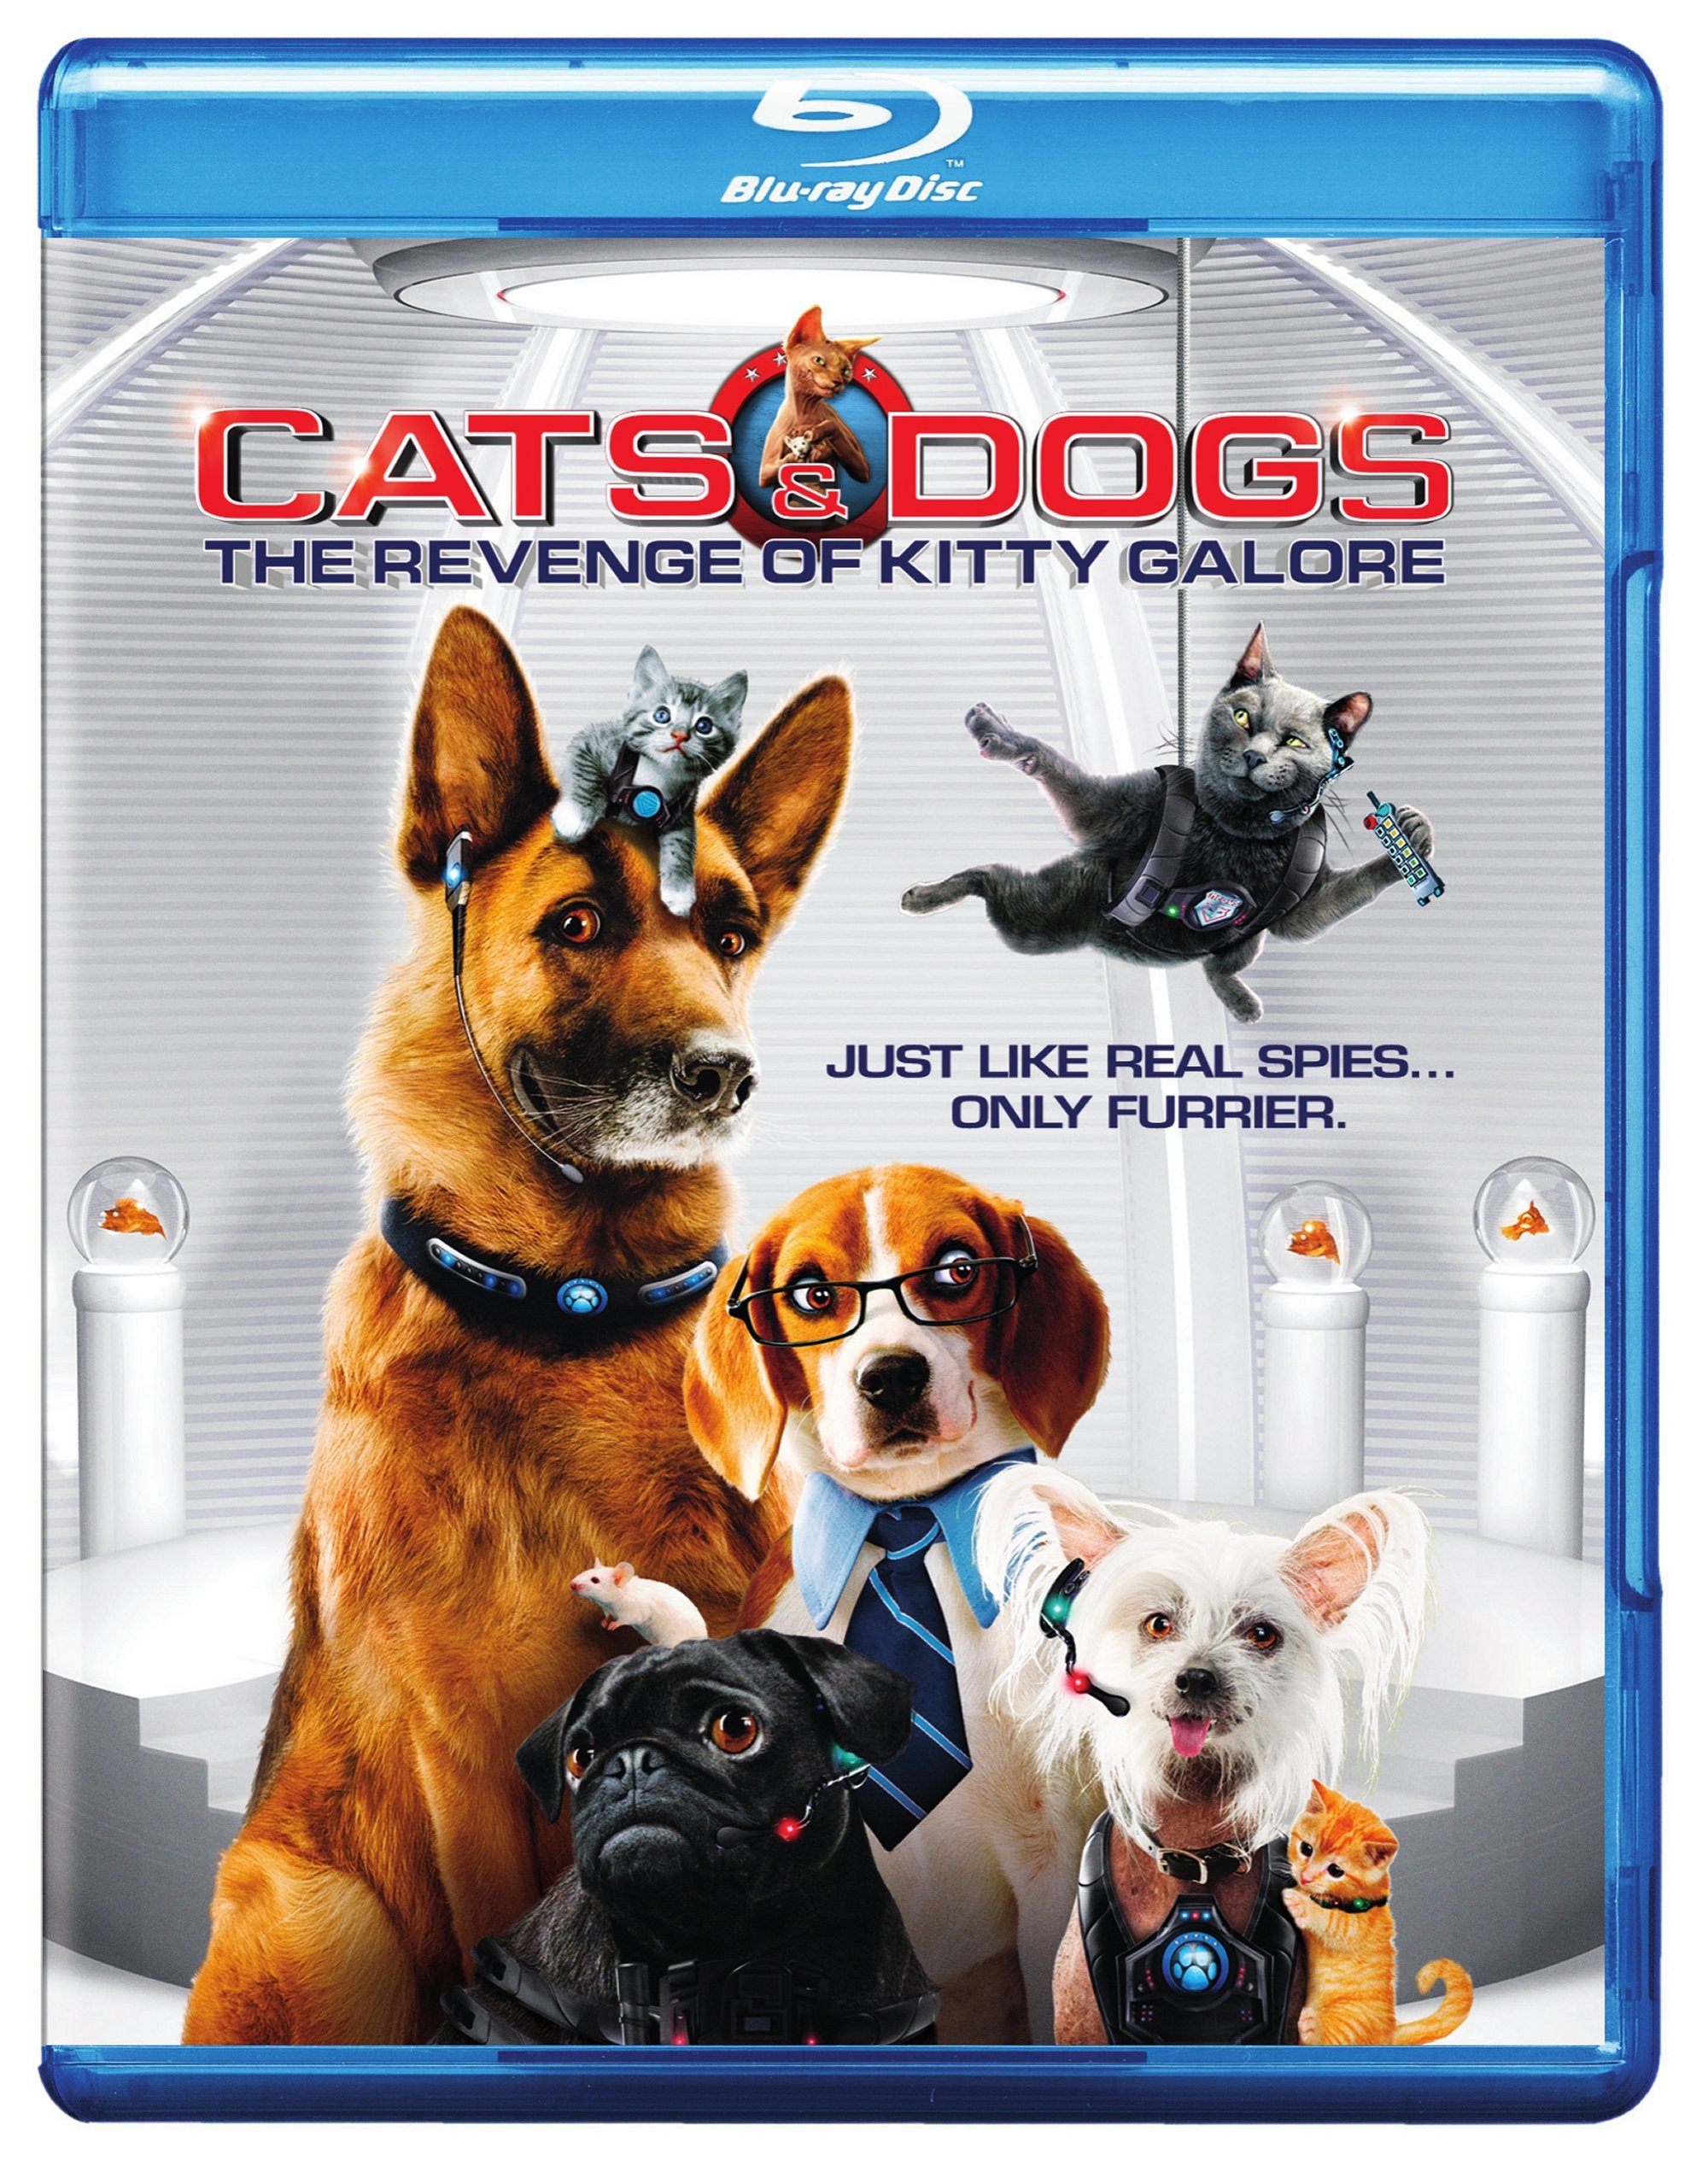 Cats & Dogs: The Revenge Of Kitty Galore - Blu-ray [ 2008 ]